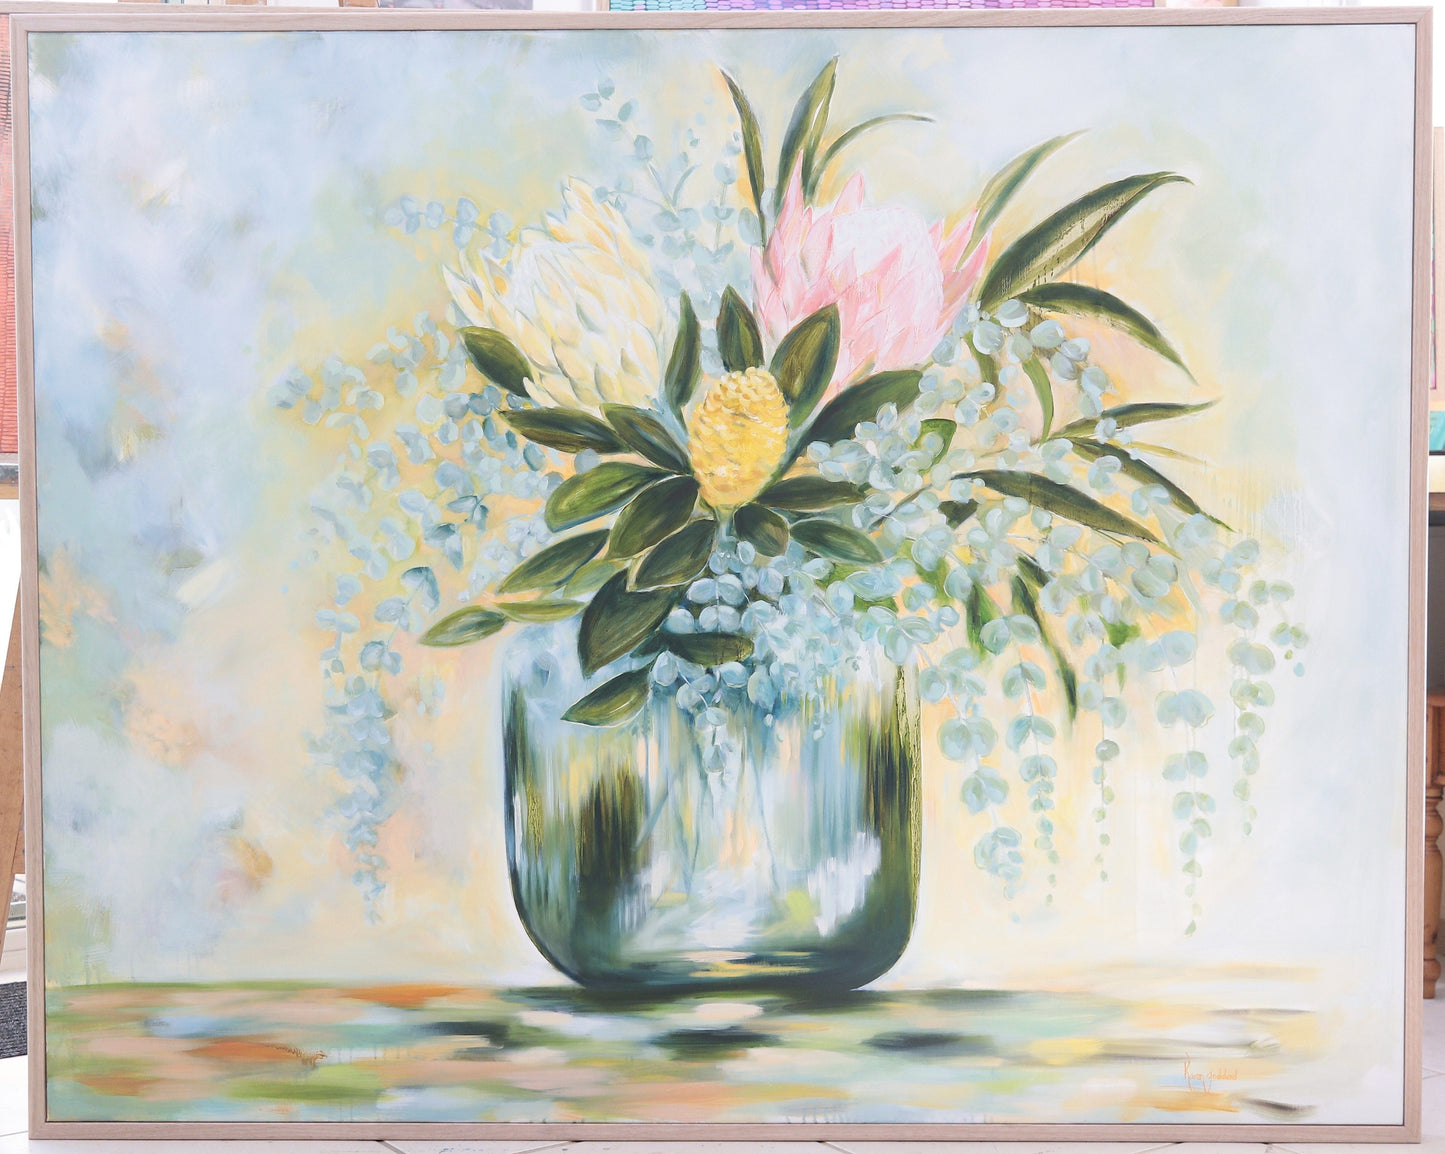 Proteas and Ginger - Limited edition print